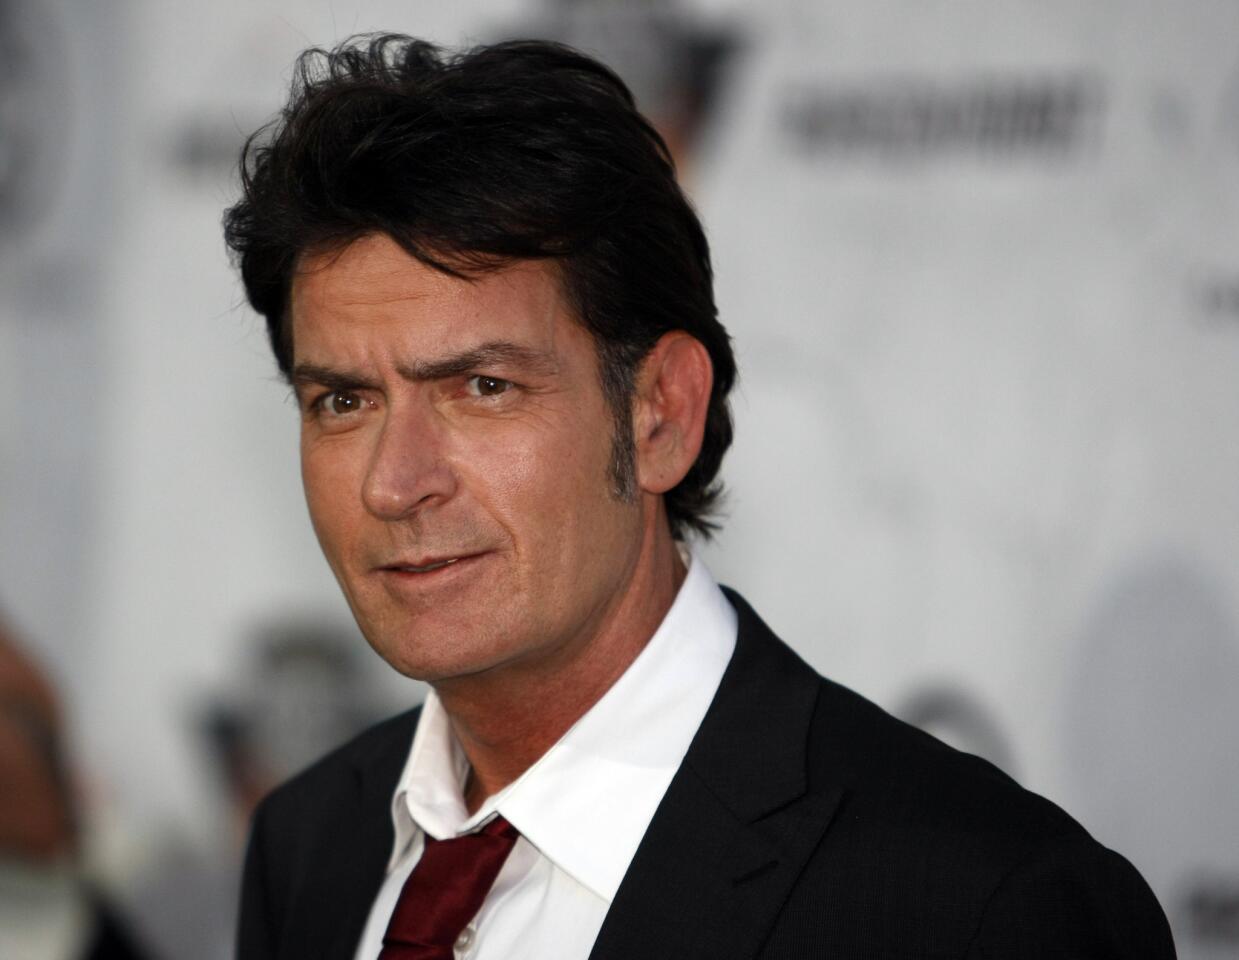 Actor Charlie Sheen, 1996 and 2011